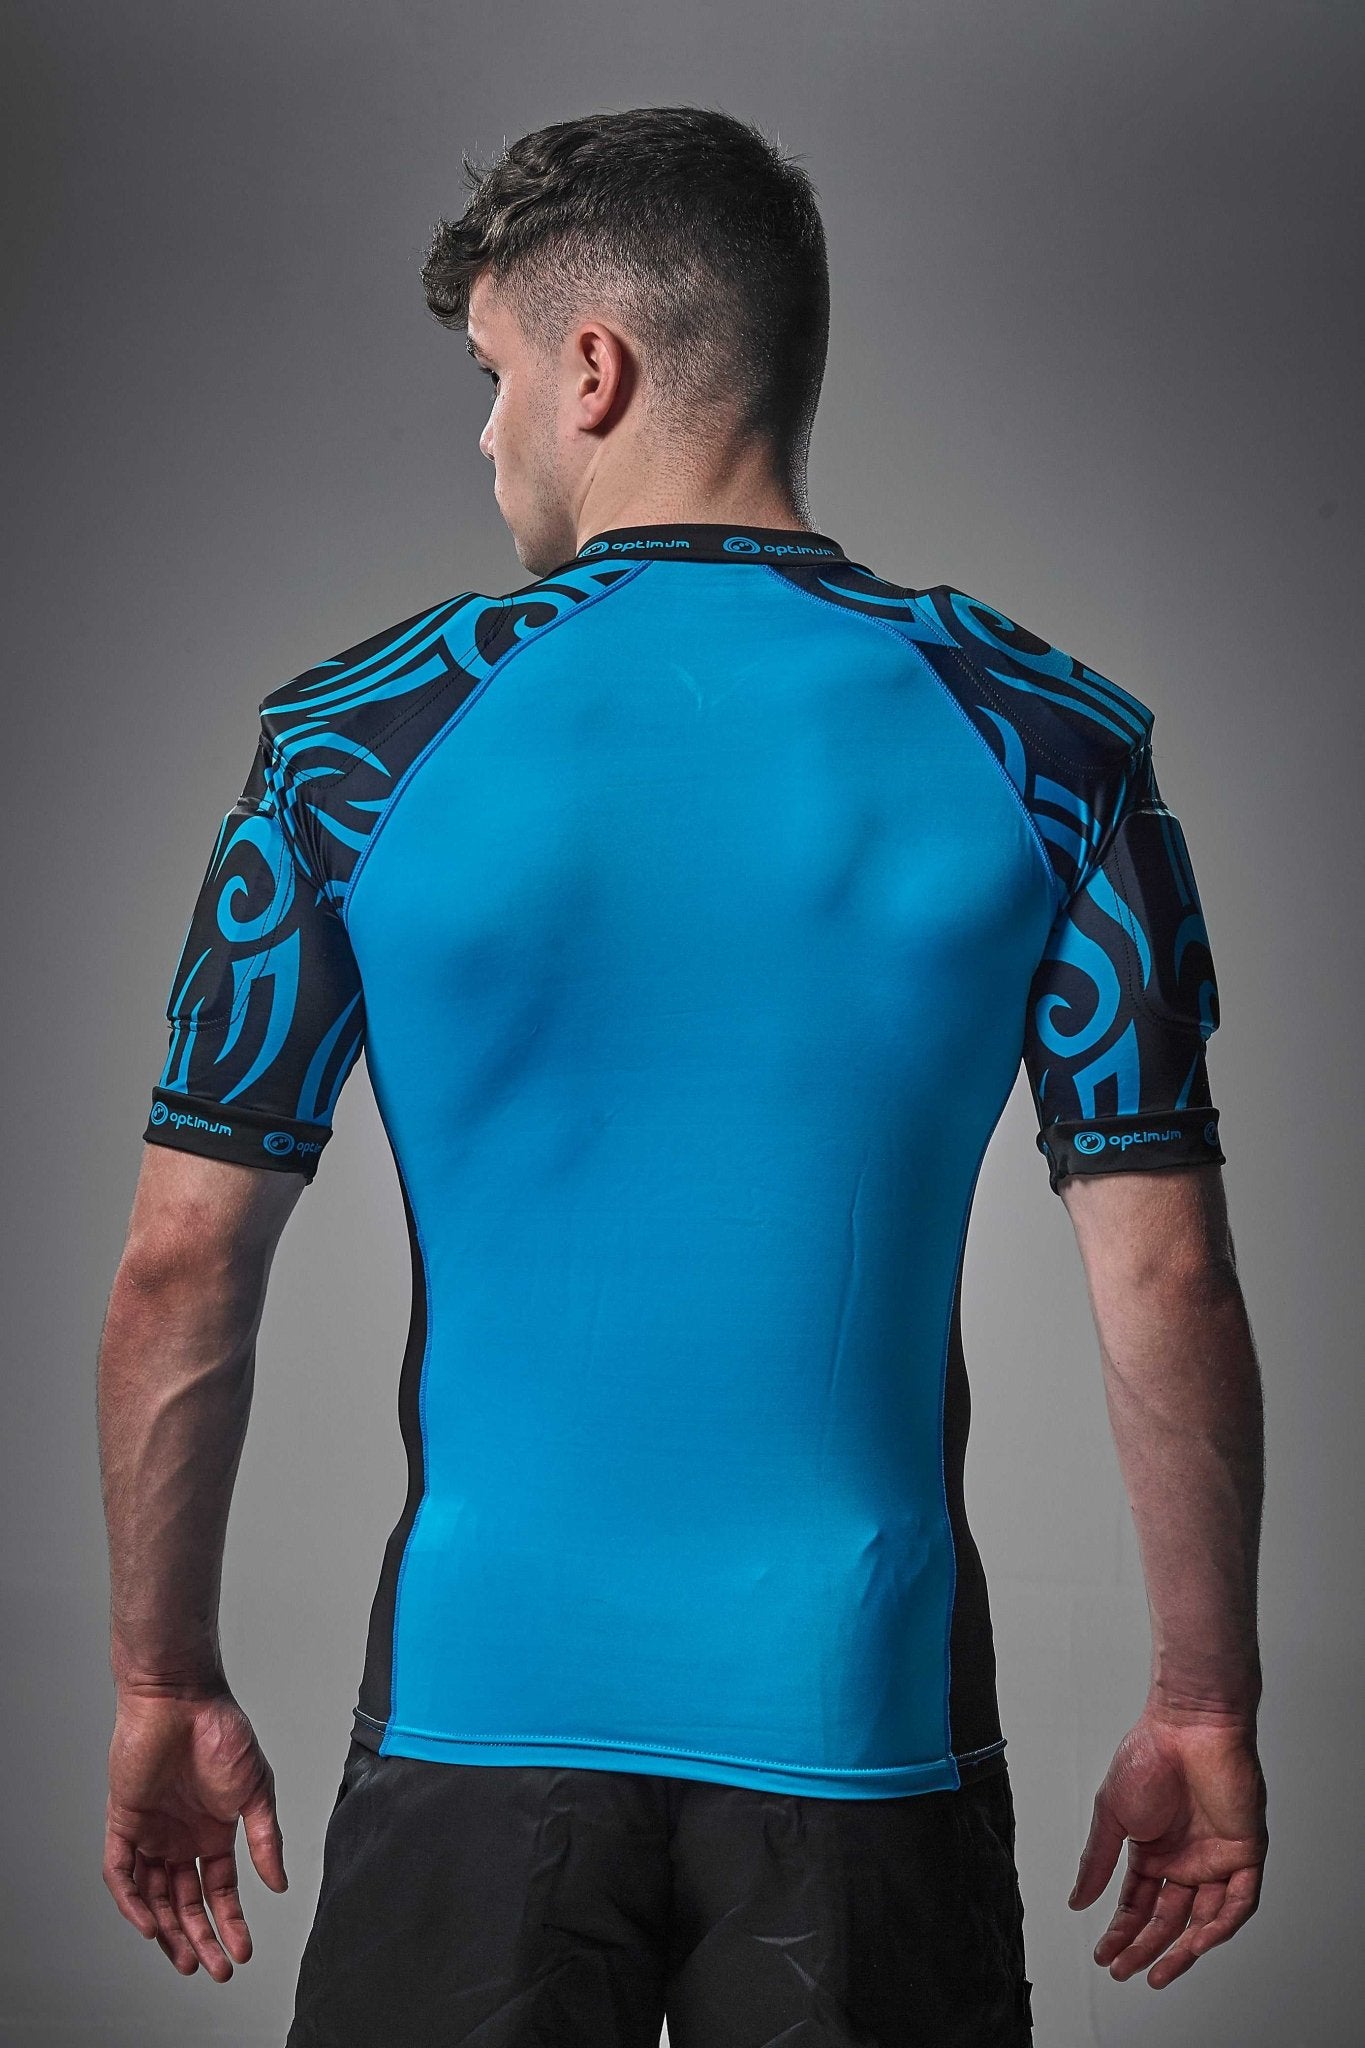 Razor Protective Top Sports Gear Training Outfit - Optimum